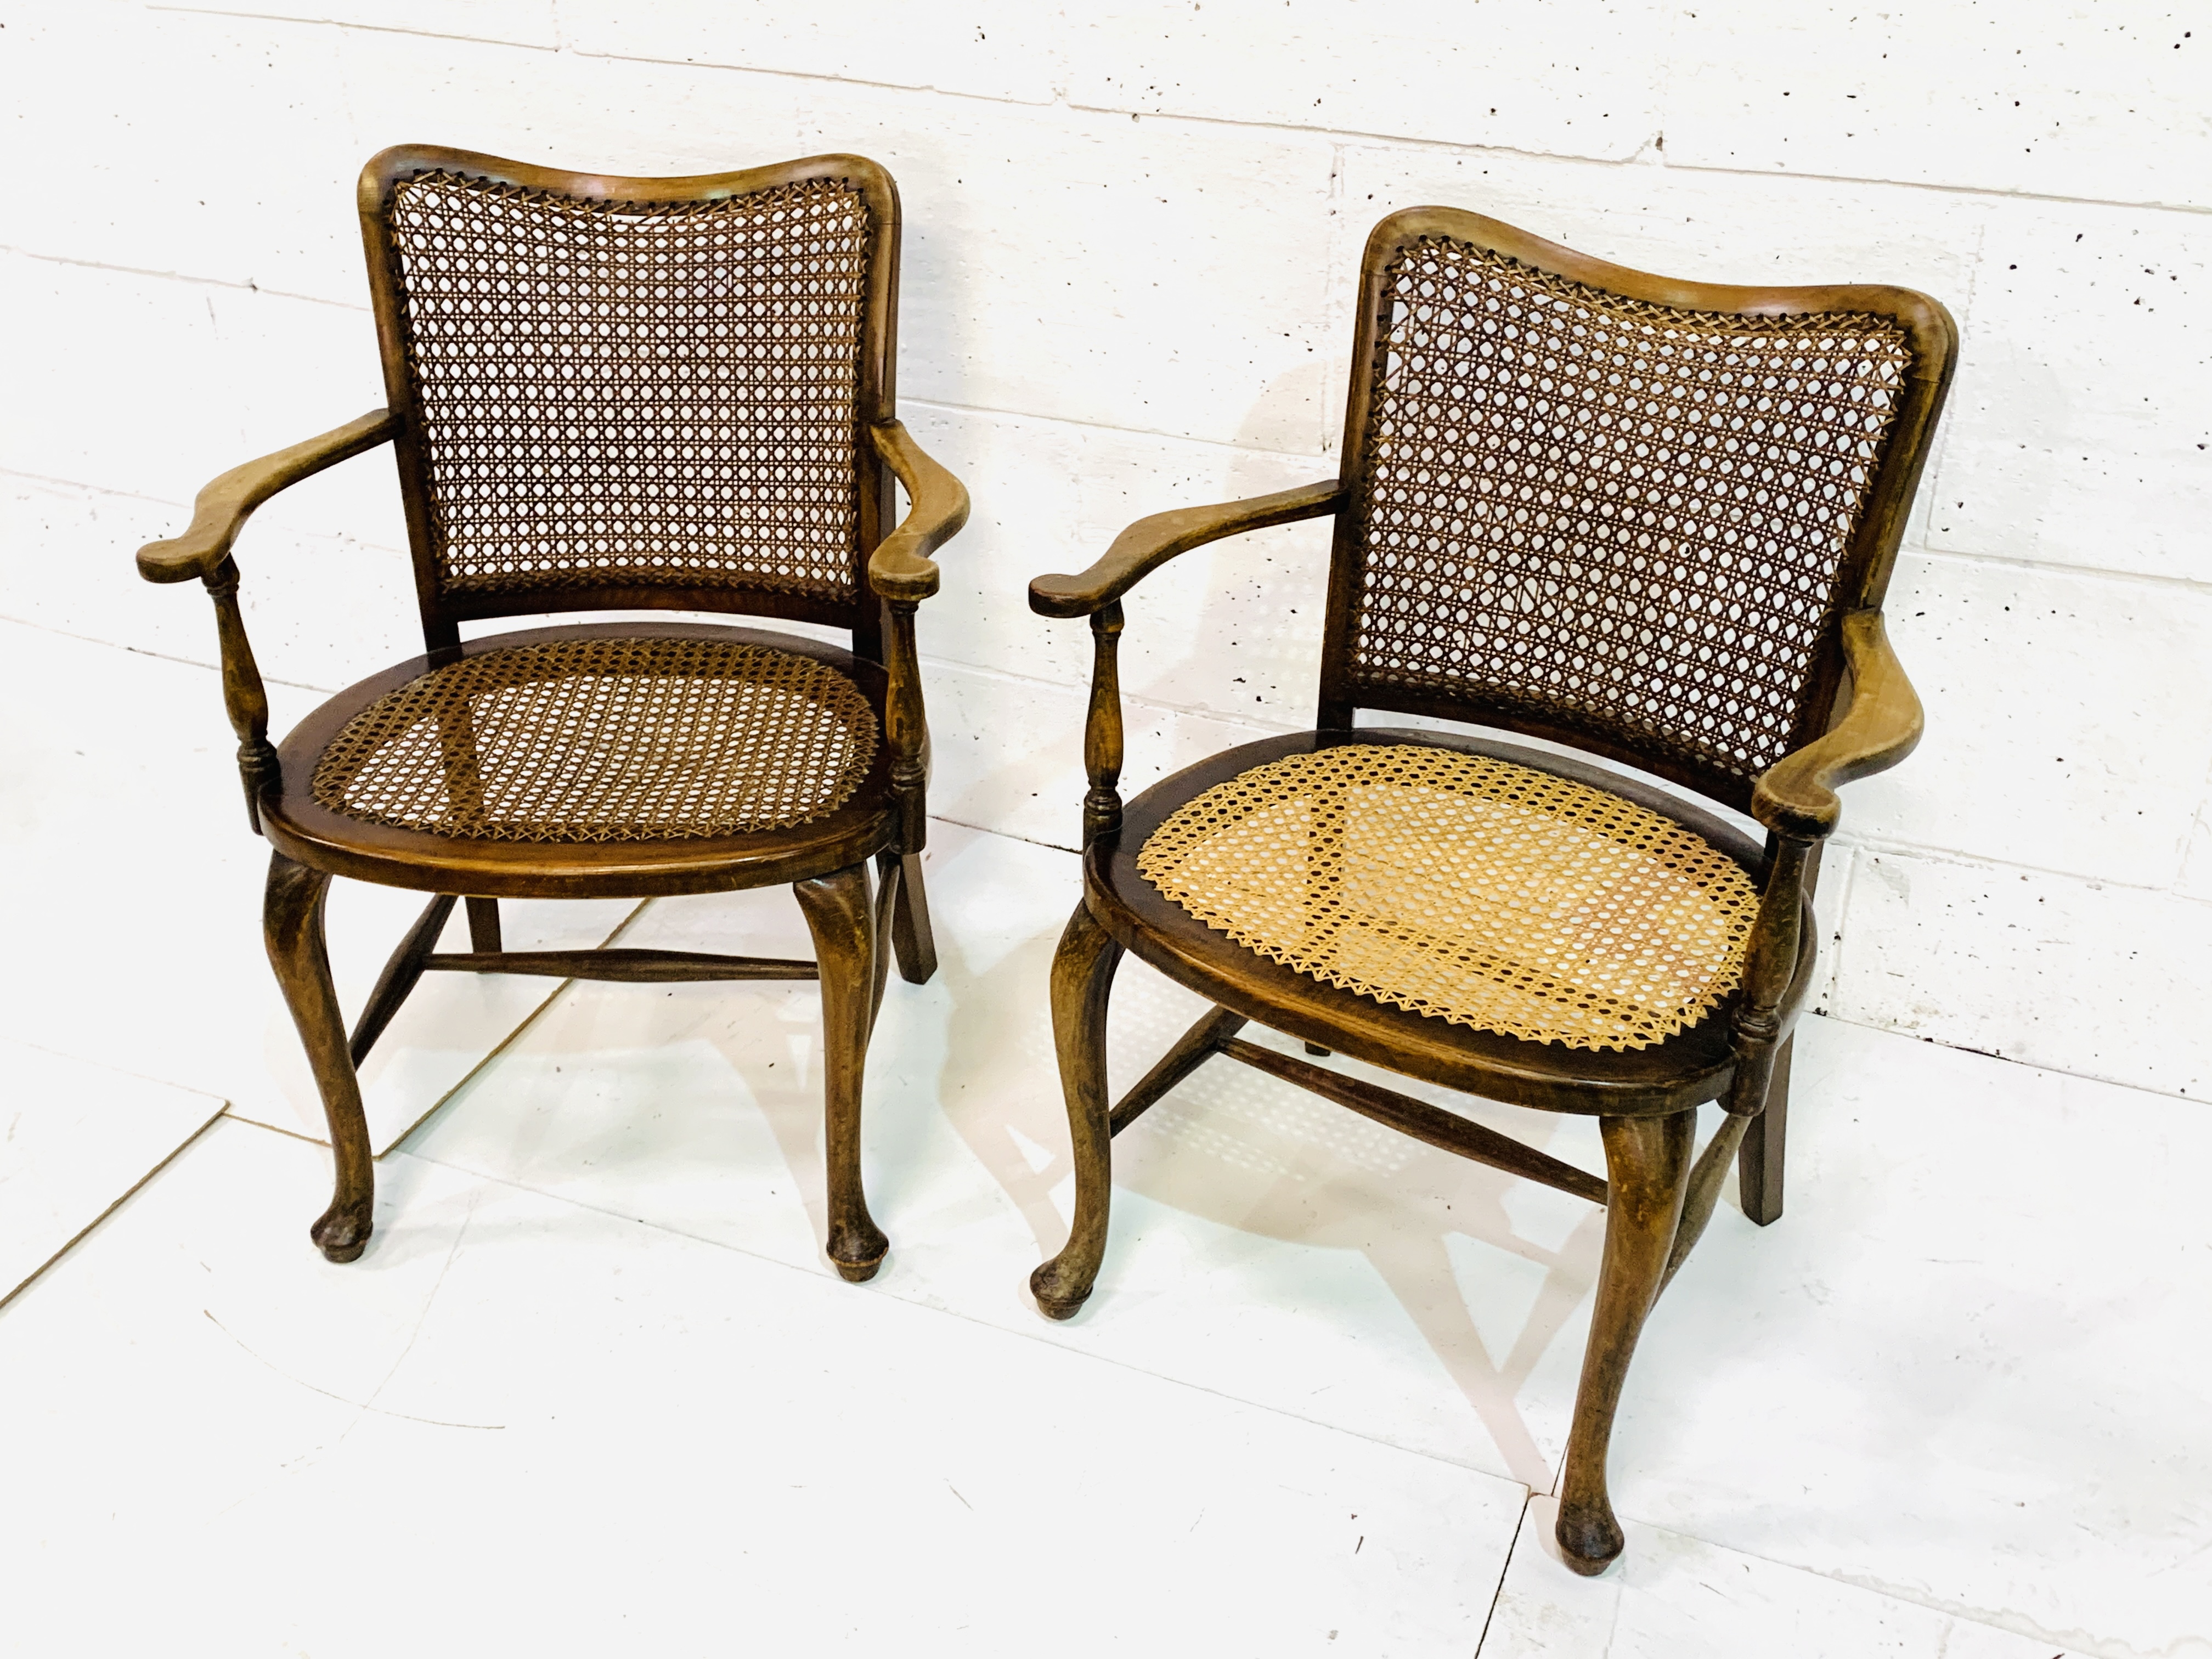 Pair of mahogany framed cane open arm chairs - Image 2 of 3